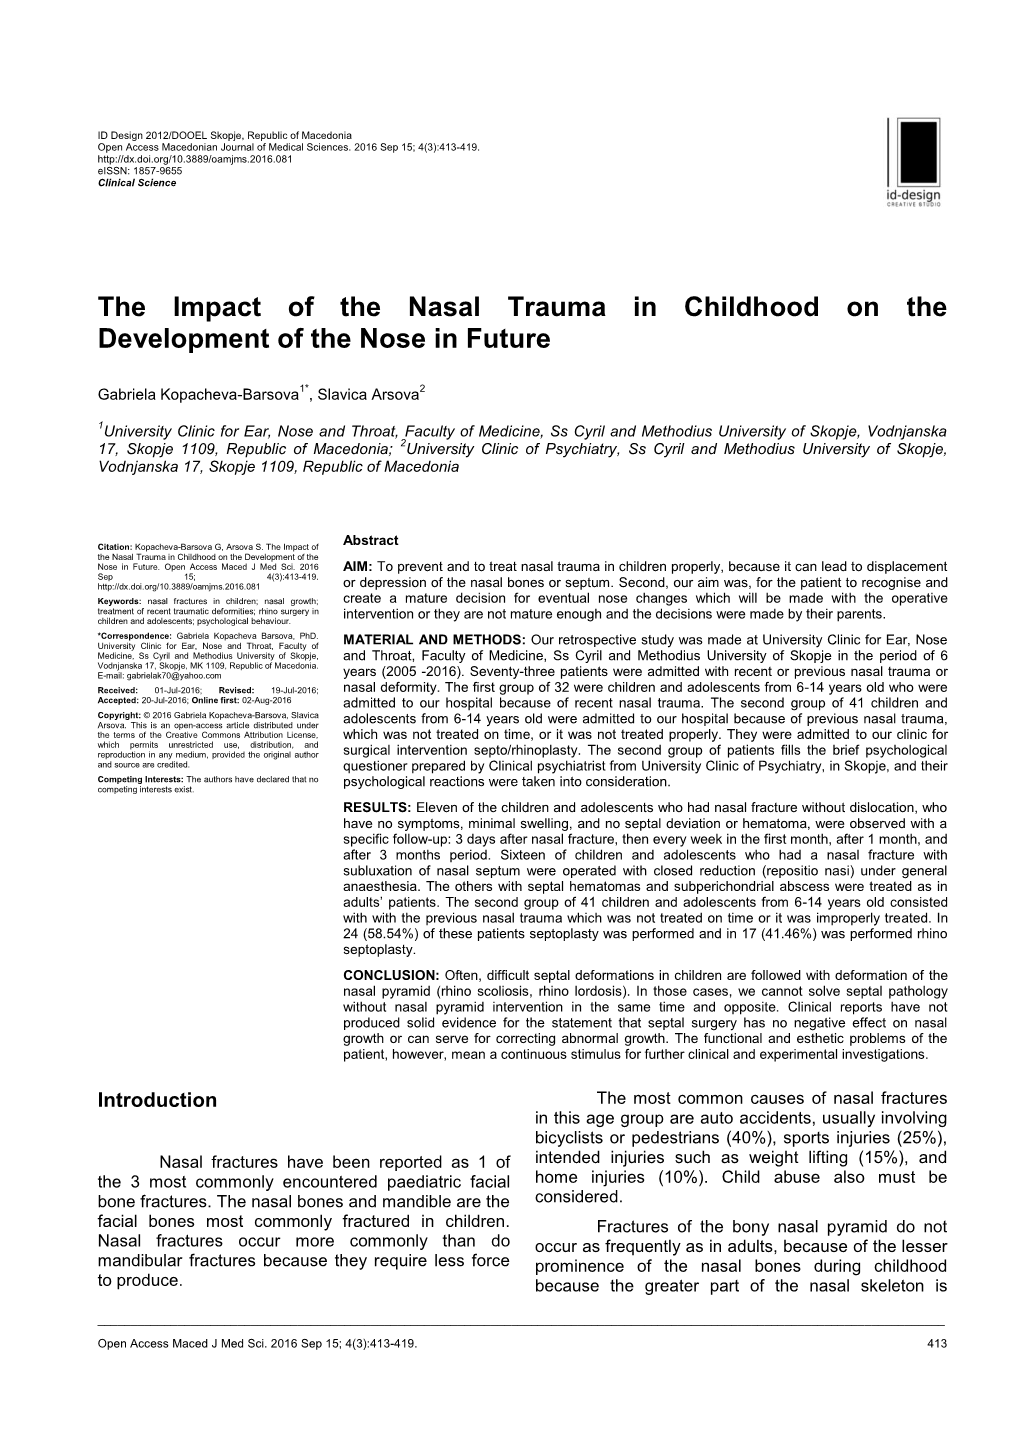 The Impact of the Nasal Trauma in Childhood on the Development of the Nose in Future